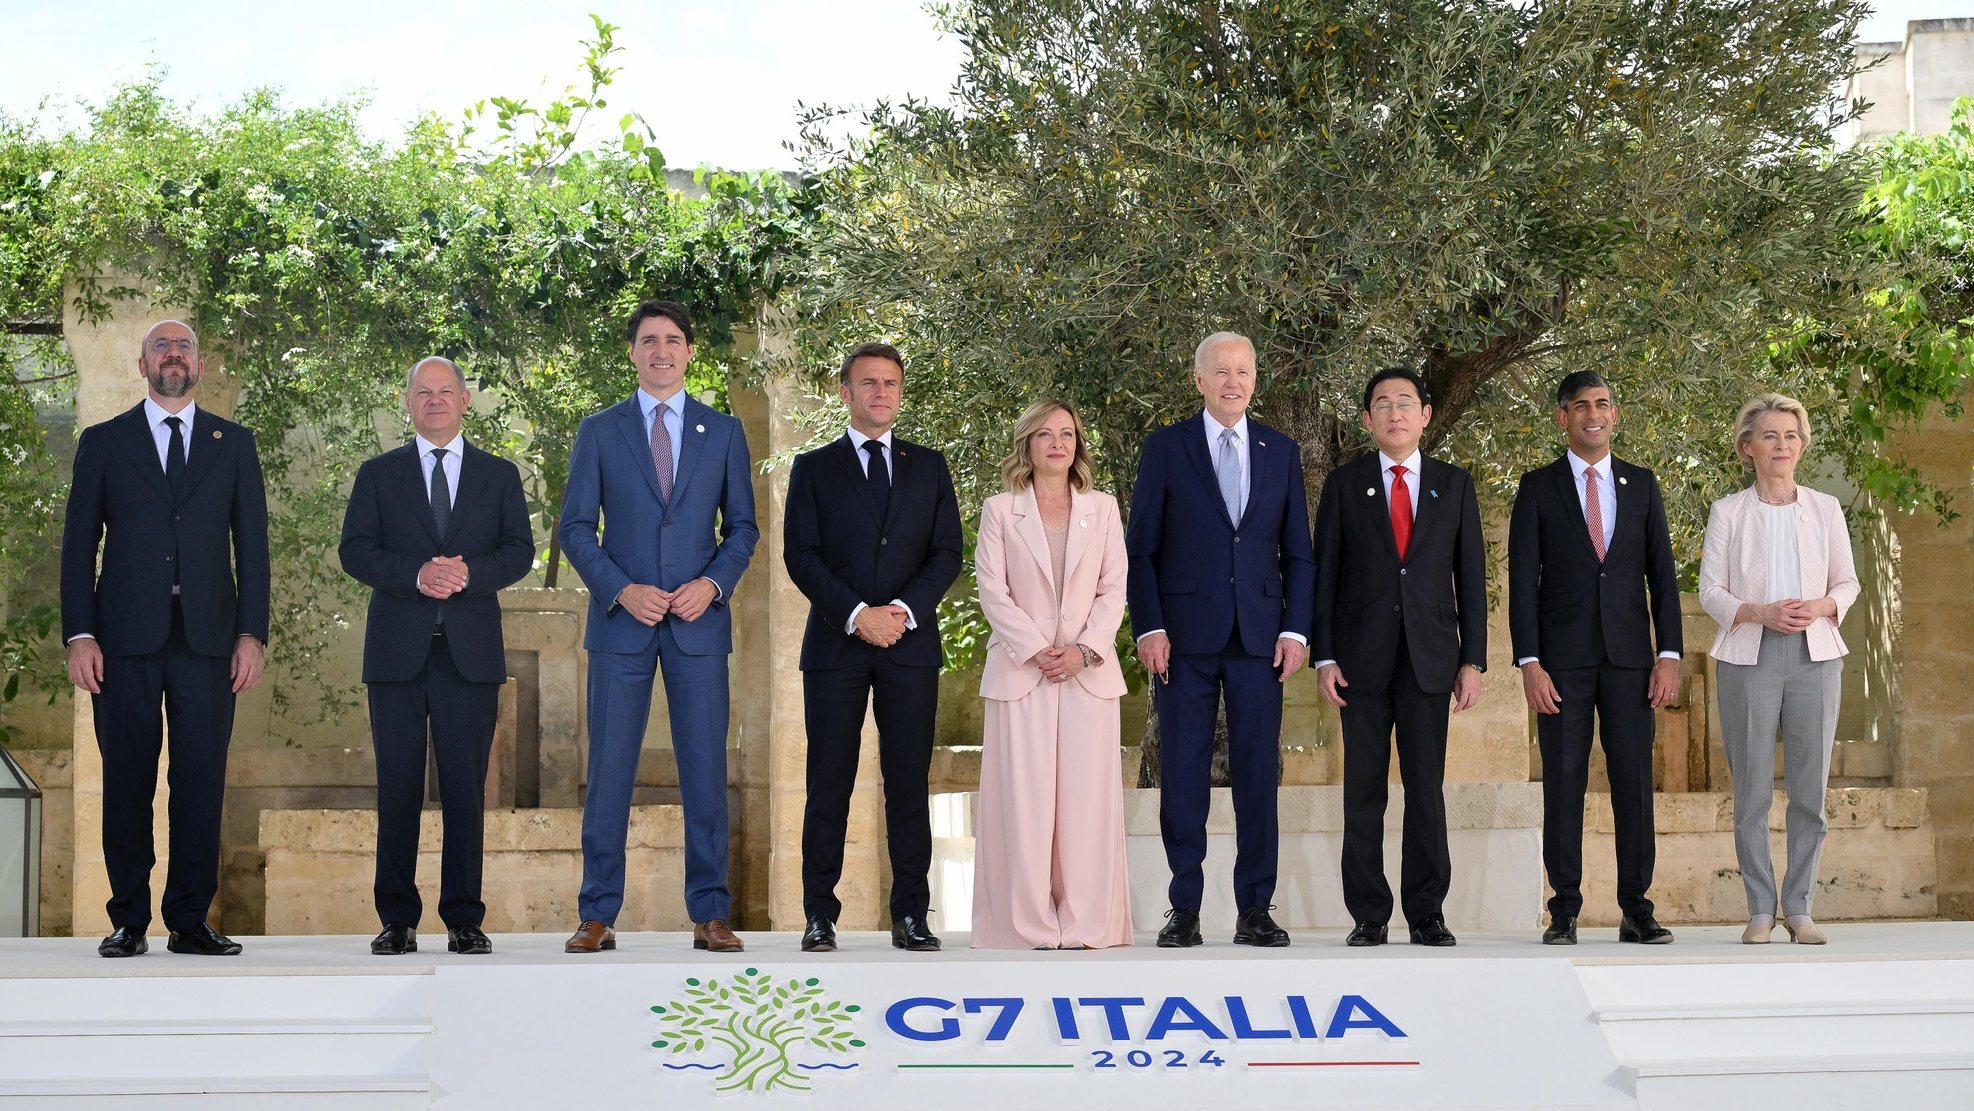 epa11407398 (L-R) European Council President Charles Michel, German Chancellor Olaf Scholz, Canadian Prime Minister Justin Trudeau, French President Emmanuel Macron, Italian Prime Minister Giorgia Meloni, US President Joe Biden, Japan&#039;s Prime Minister Fumio Kishida, British Prime Minister Rishi Sunak, European Commission President Ursula von der Leyen pose for a group photograph during a welcome ceremony for the G7 summit in Borgo Egnazia, southern Italy, 13 June 2024. The 50th G7 summit will bring together the Group of Seven member states leaders in Borgo Egnazia resort in southern Italy from 13 to 15 June 2024.  EPA/ETTORE FERRARI